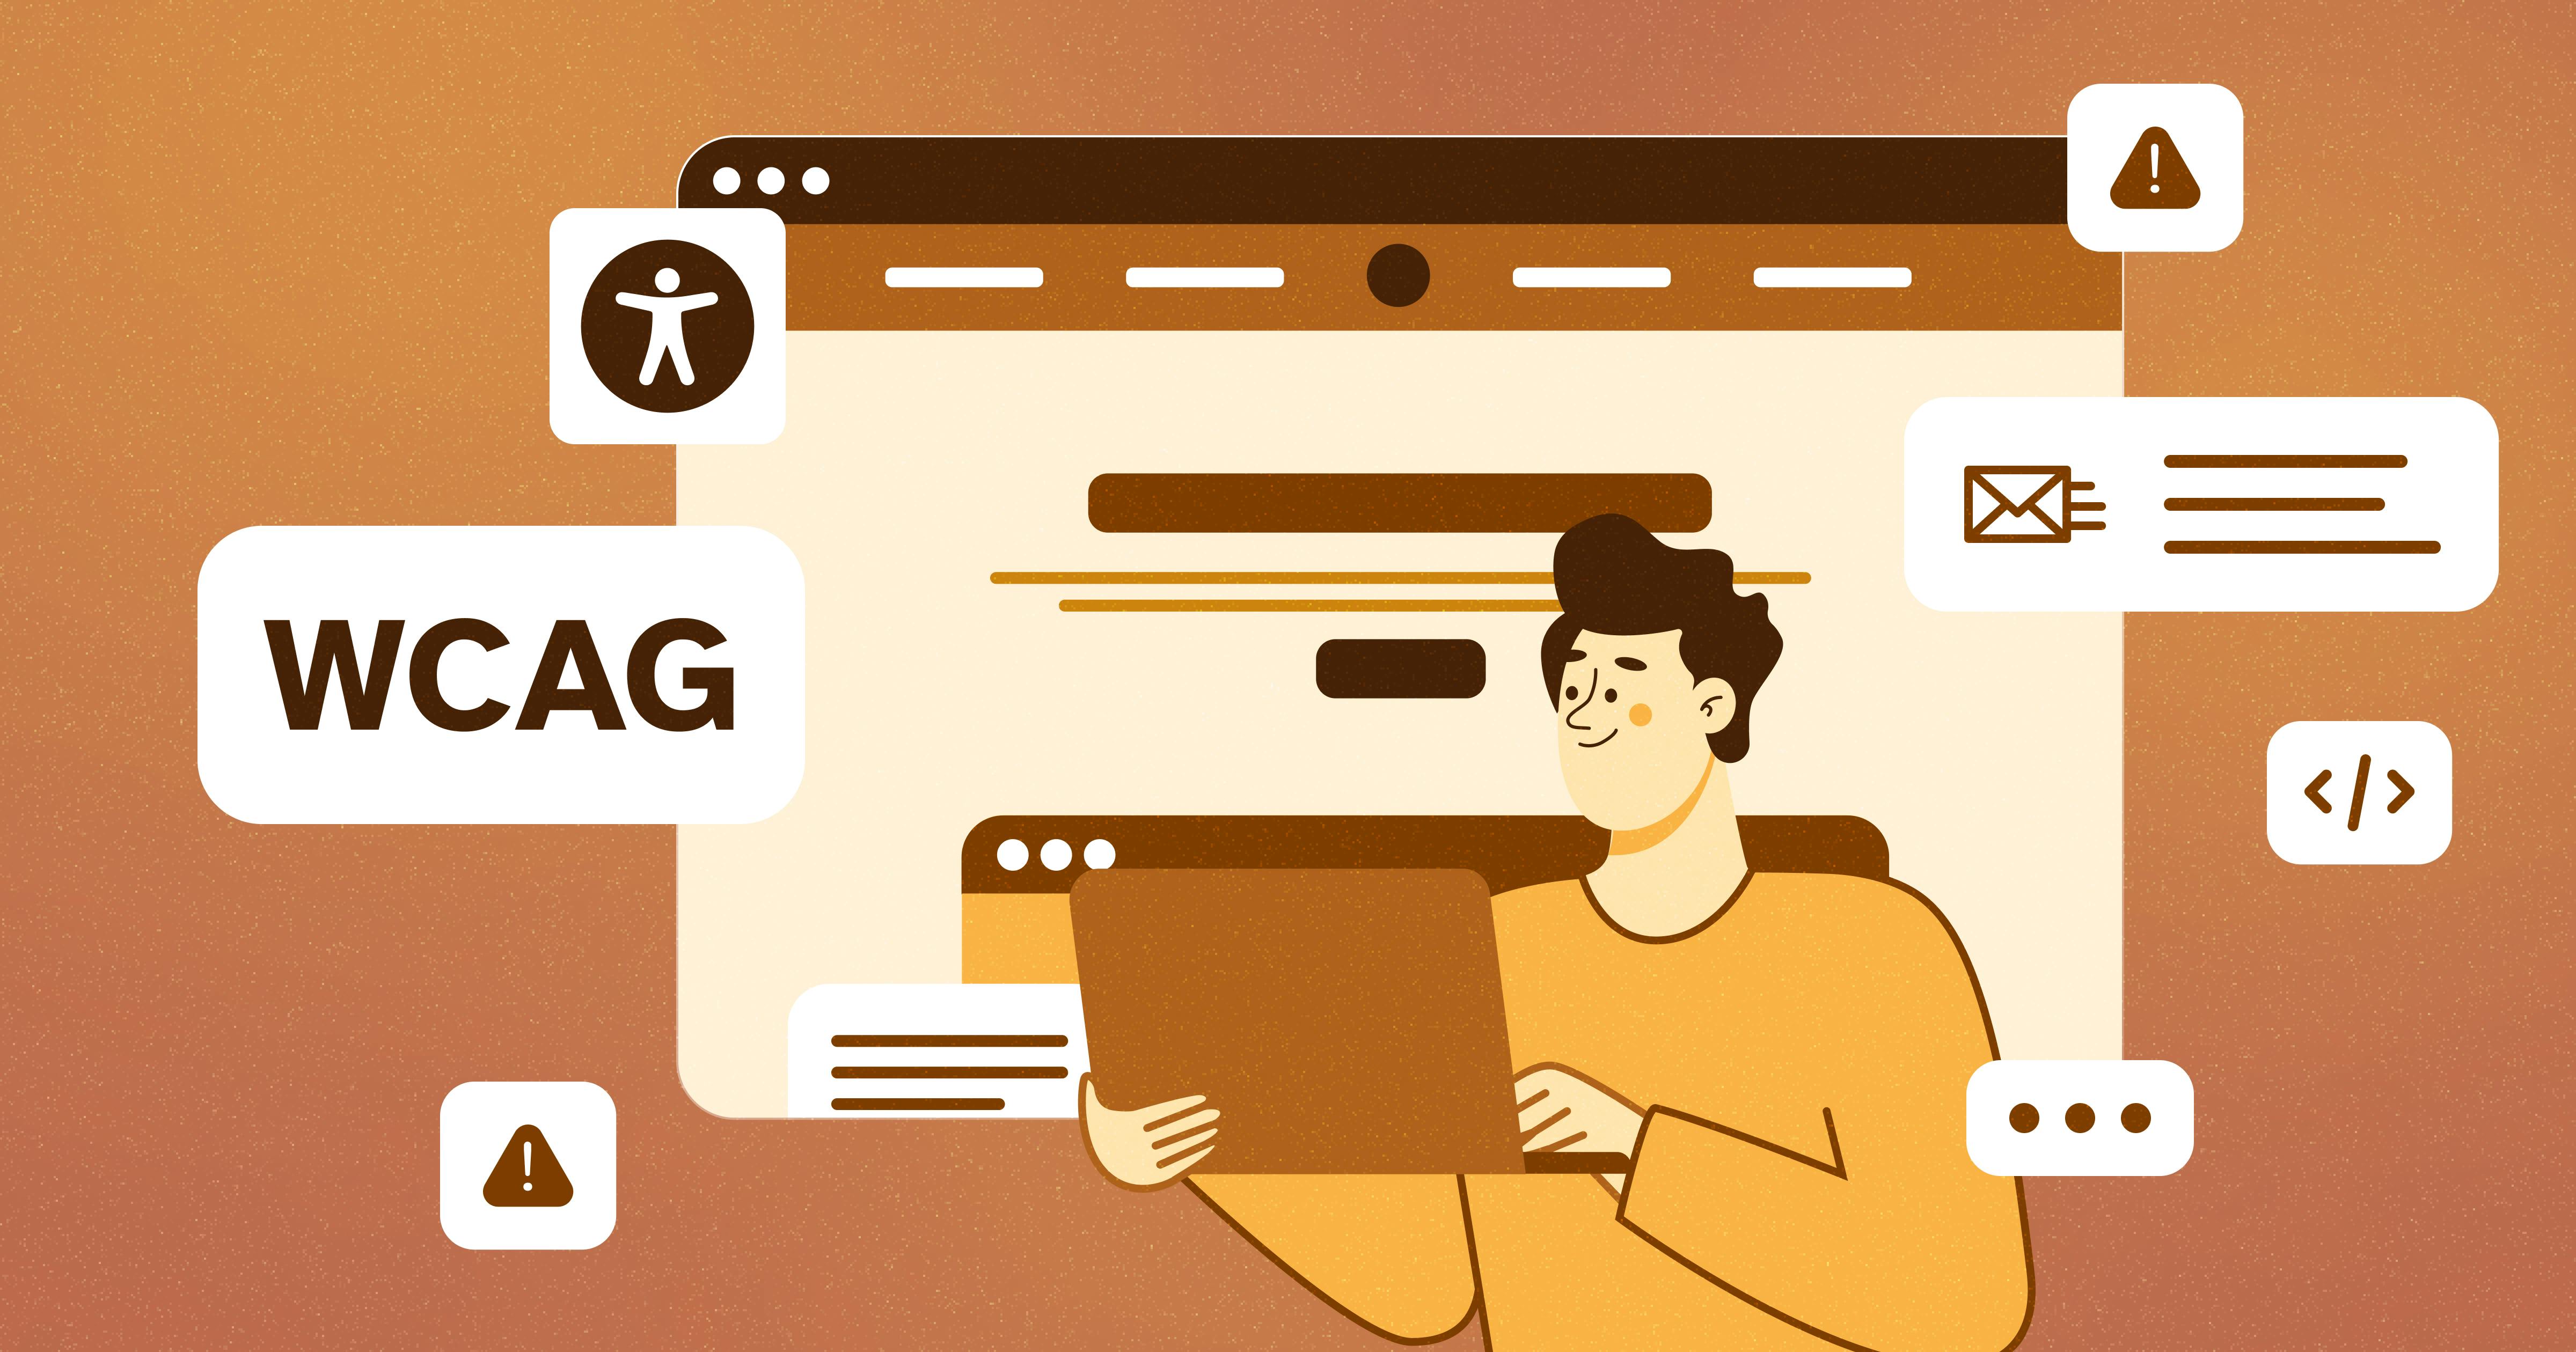 Stylized web browser with various popups behind a man holding a laptop.